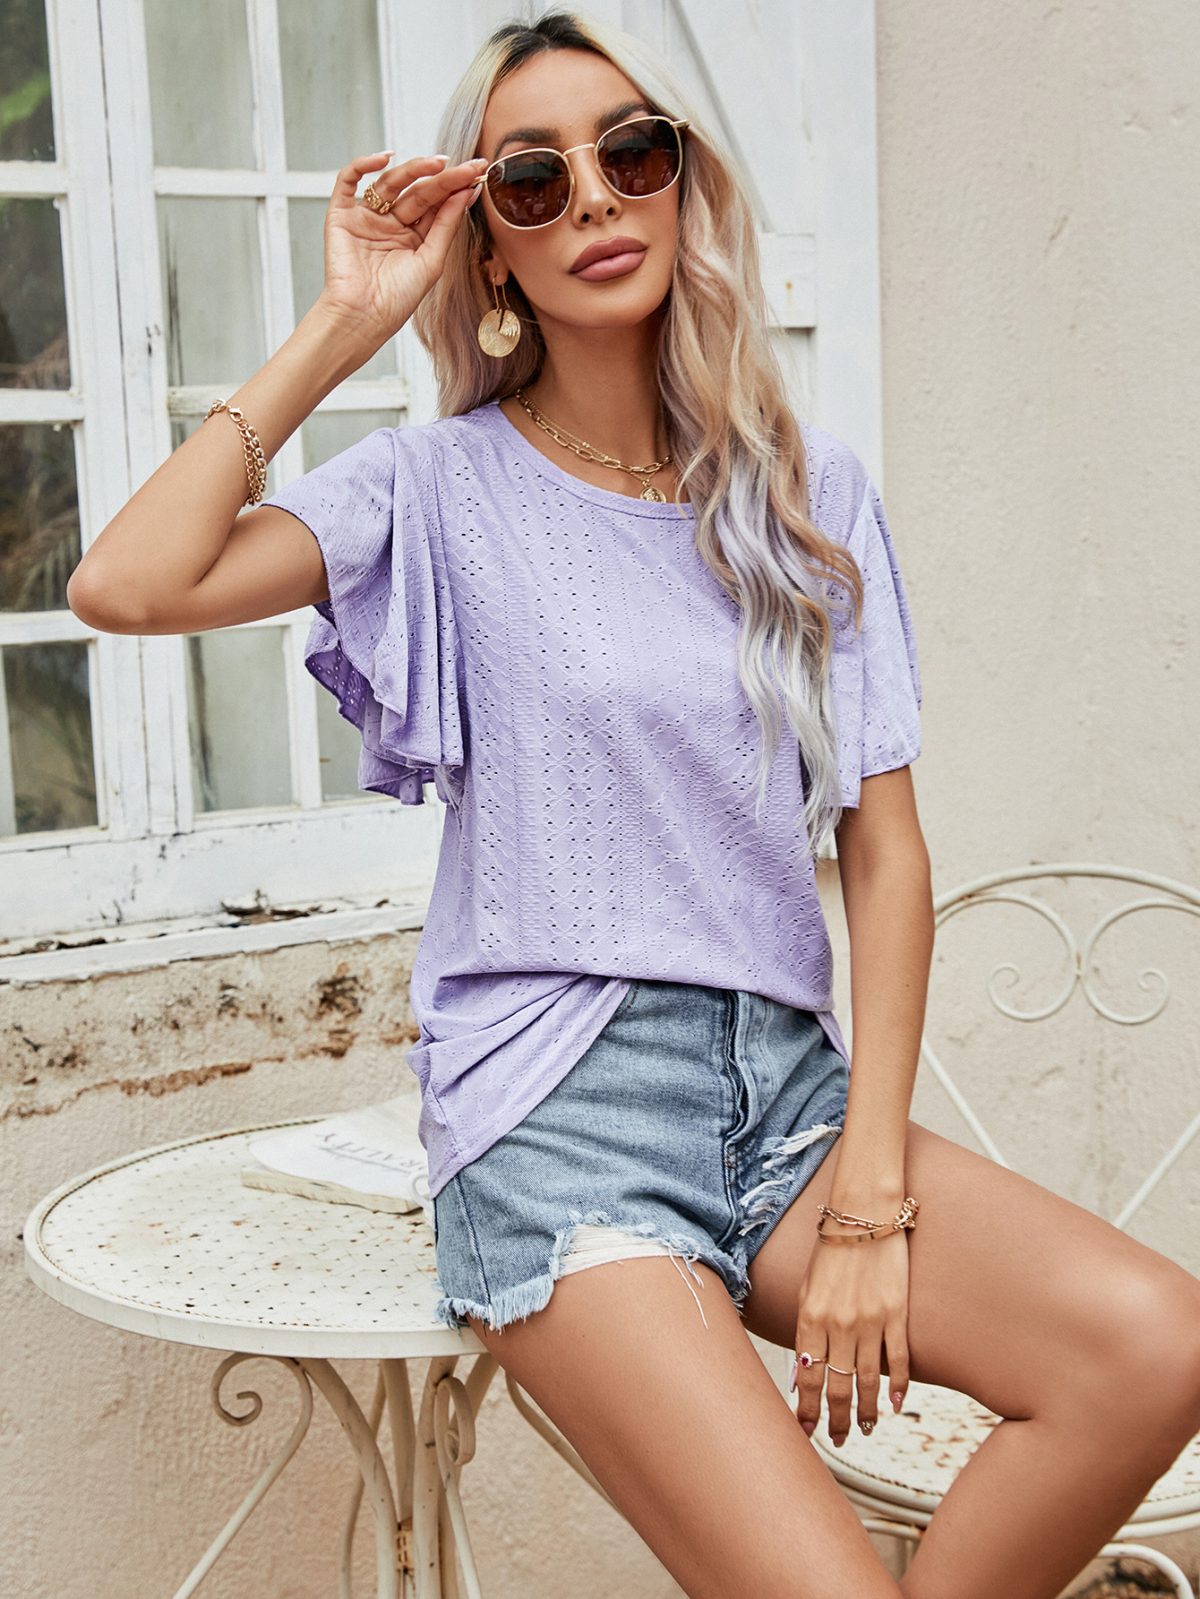 Hollow Out Cutout Out Round Neck Ruffle Sleeve Casual T-Shirt in T-shirts & Tops